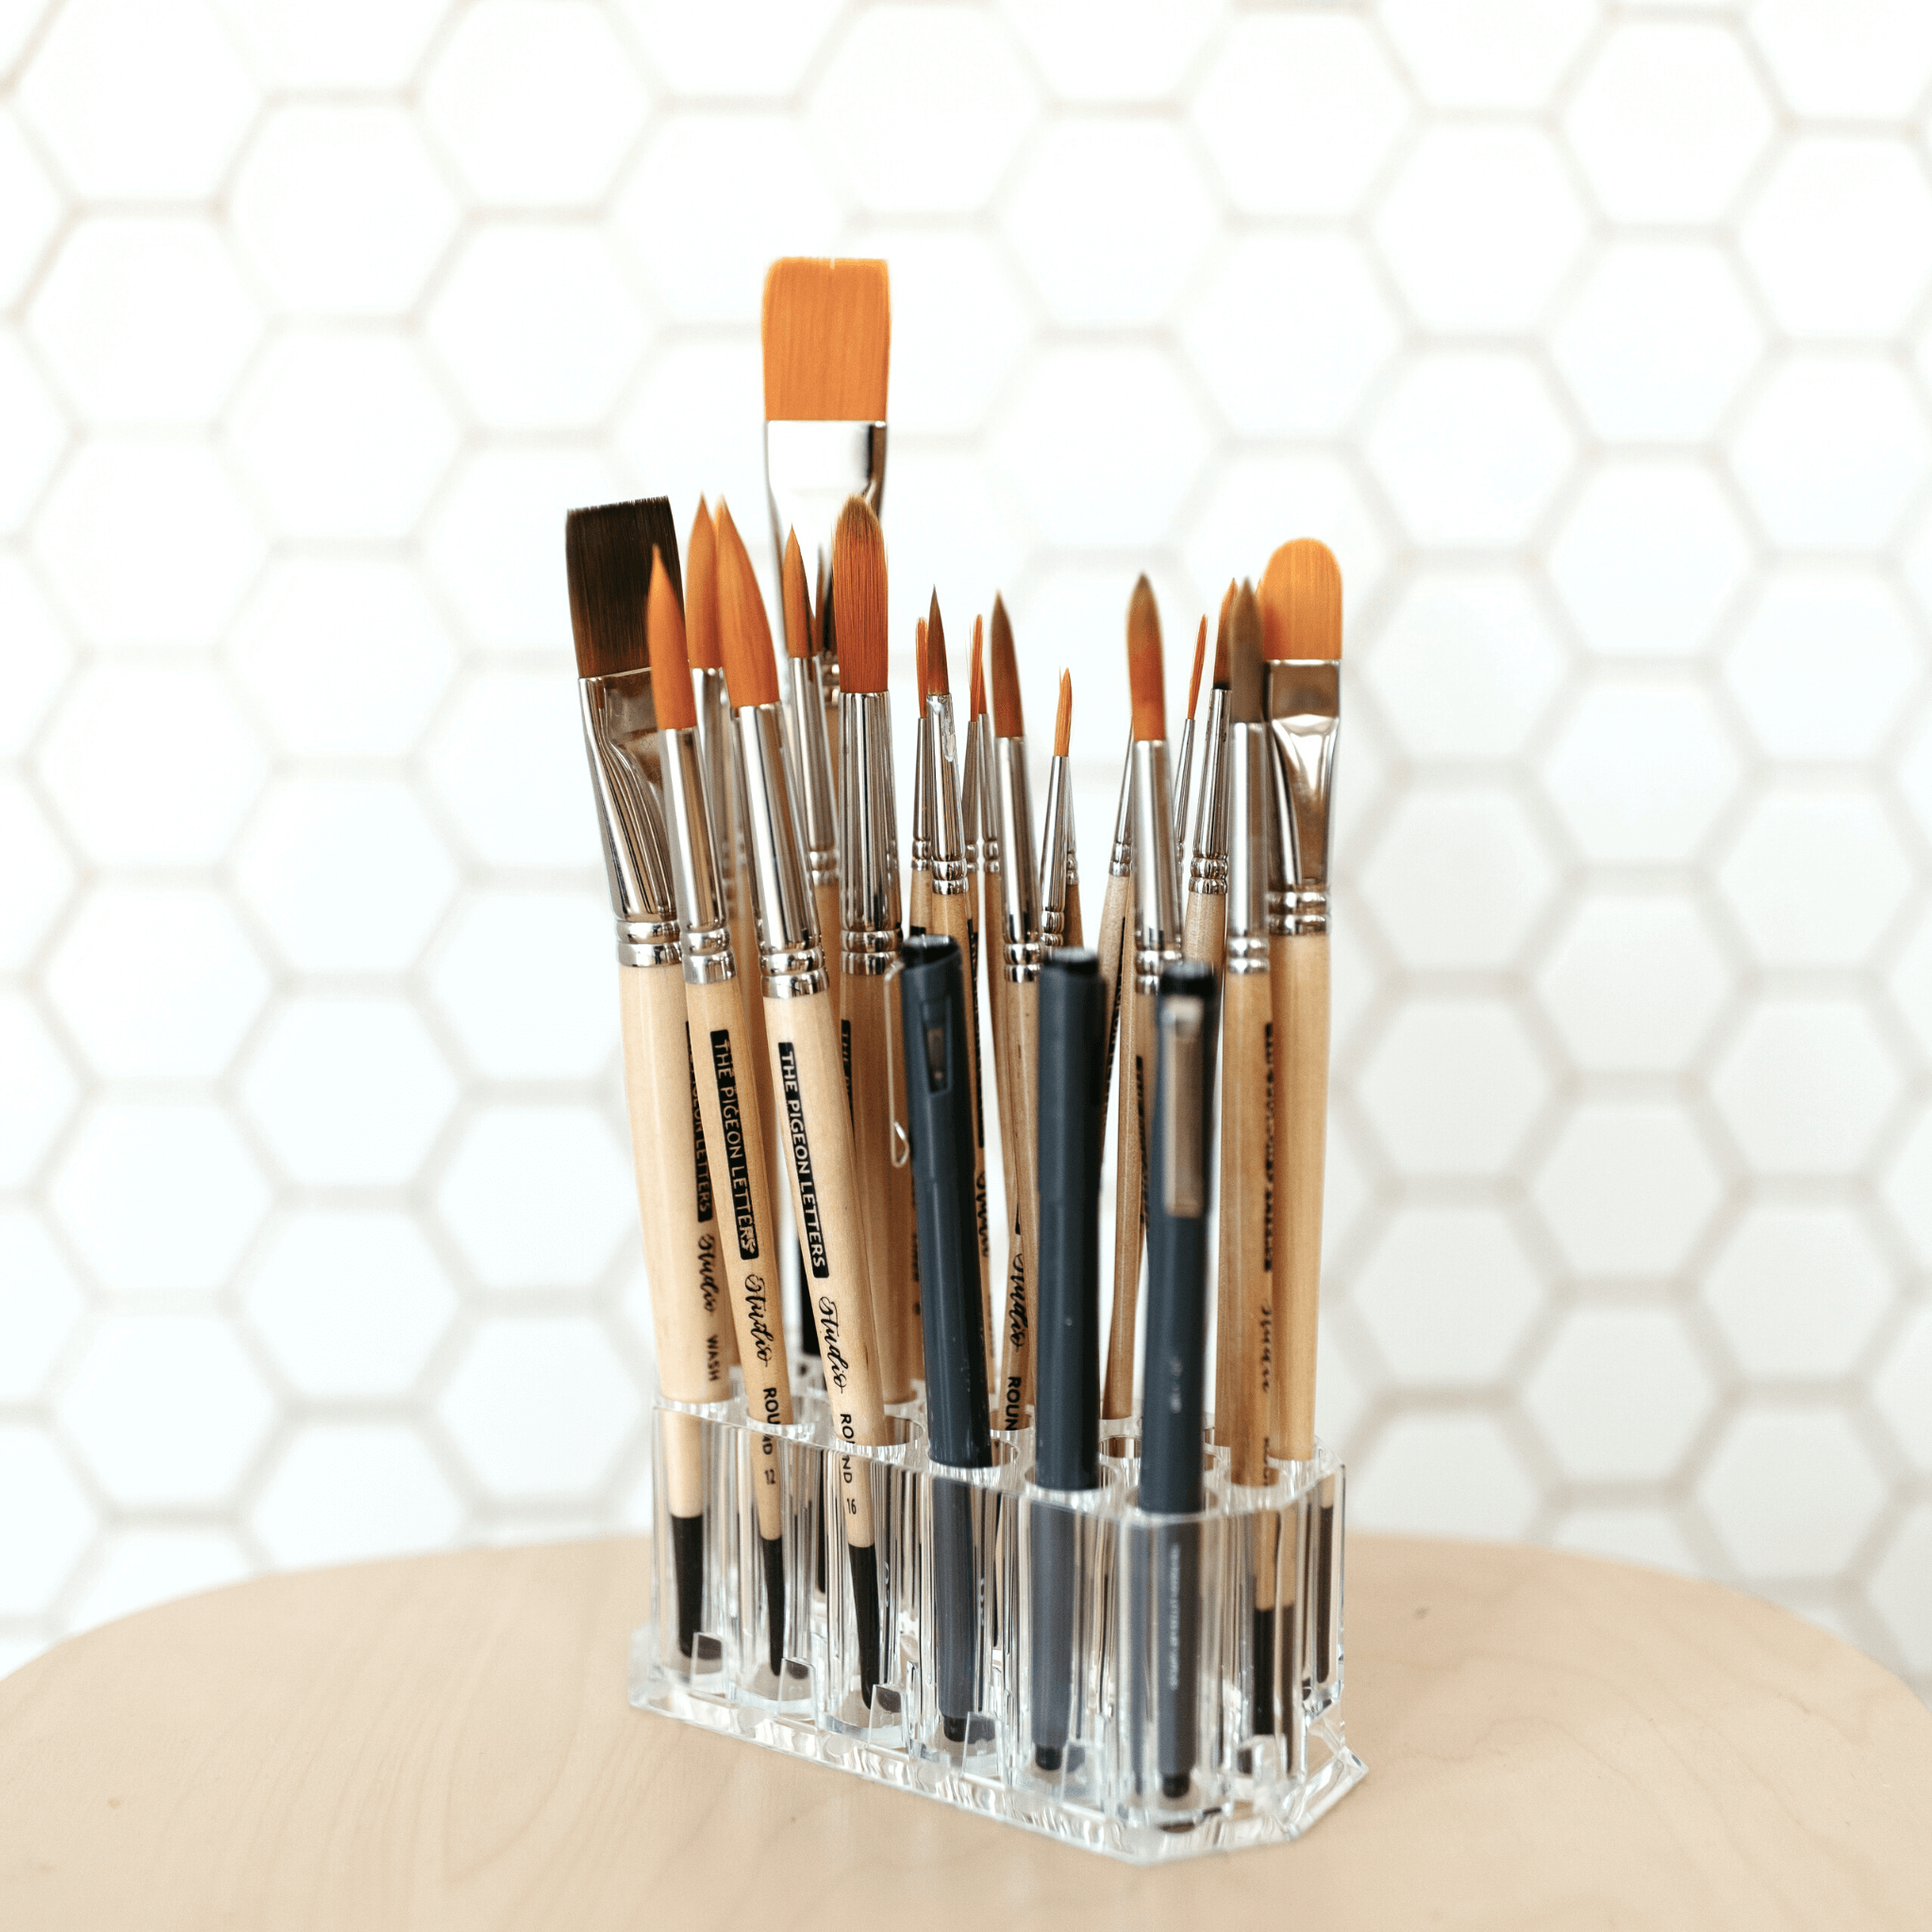 Collection of cruelty-free art supplies including brushes and pens